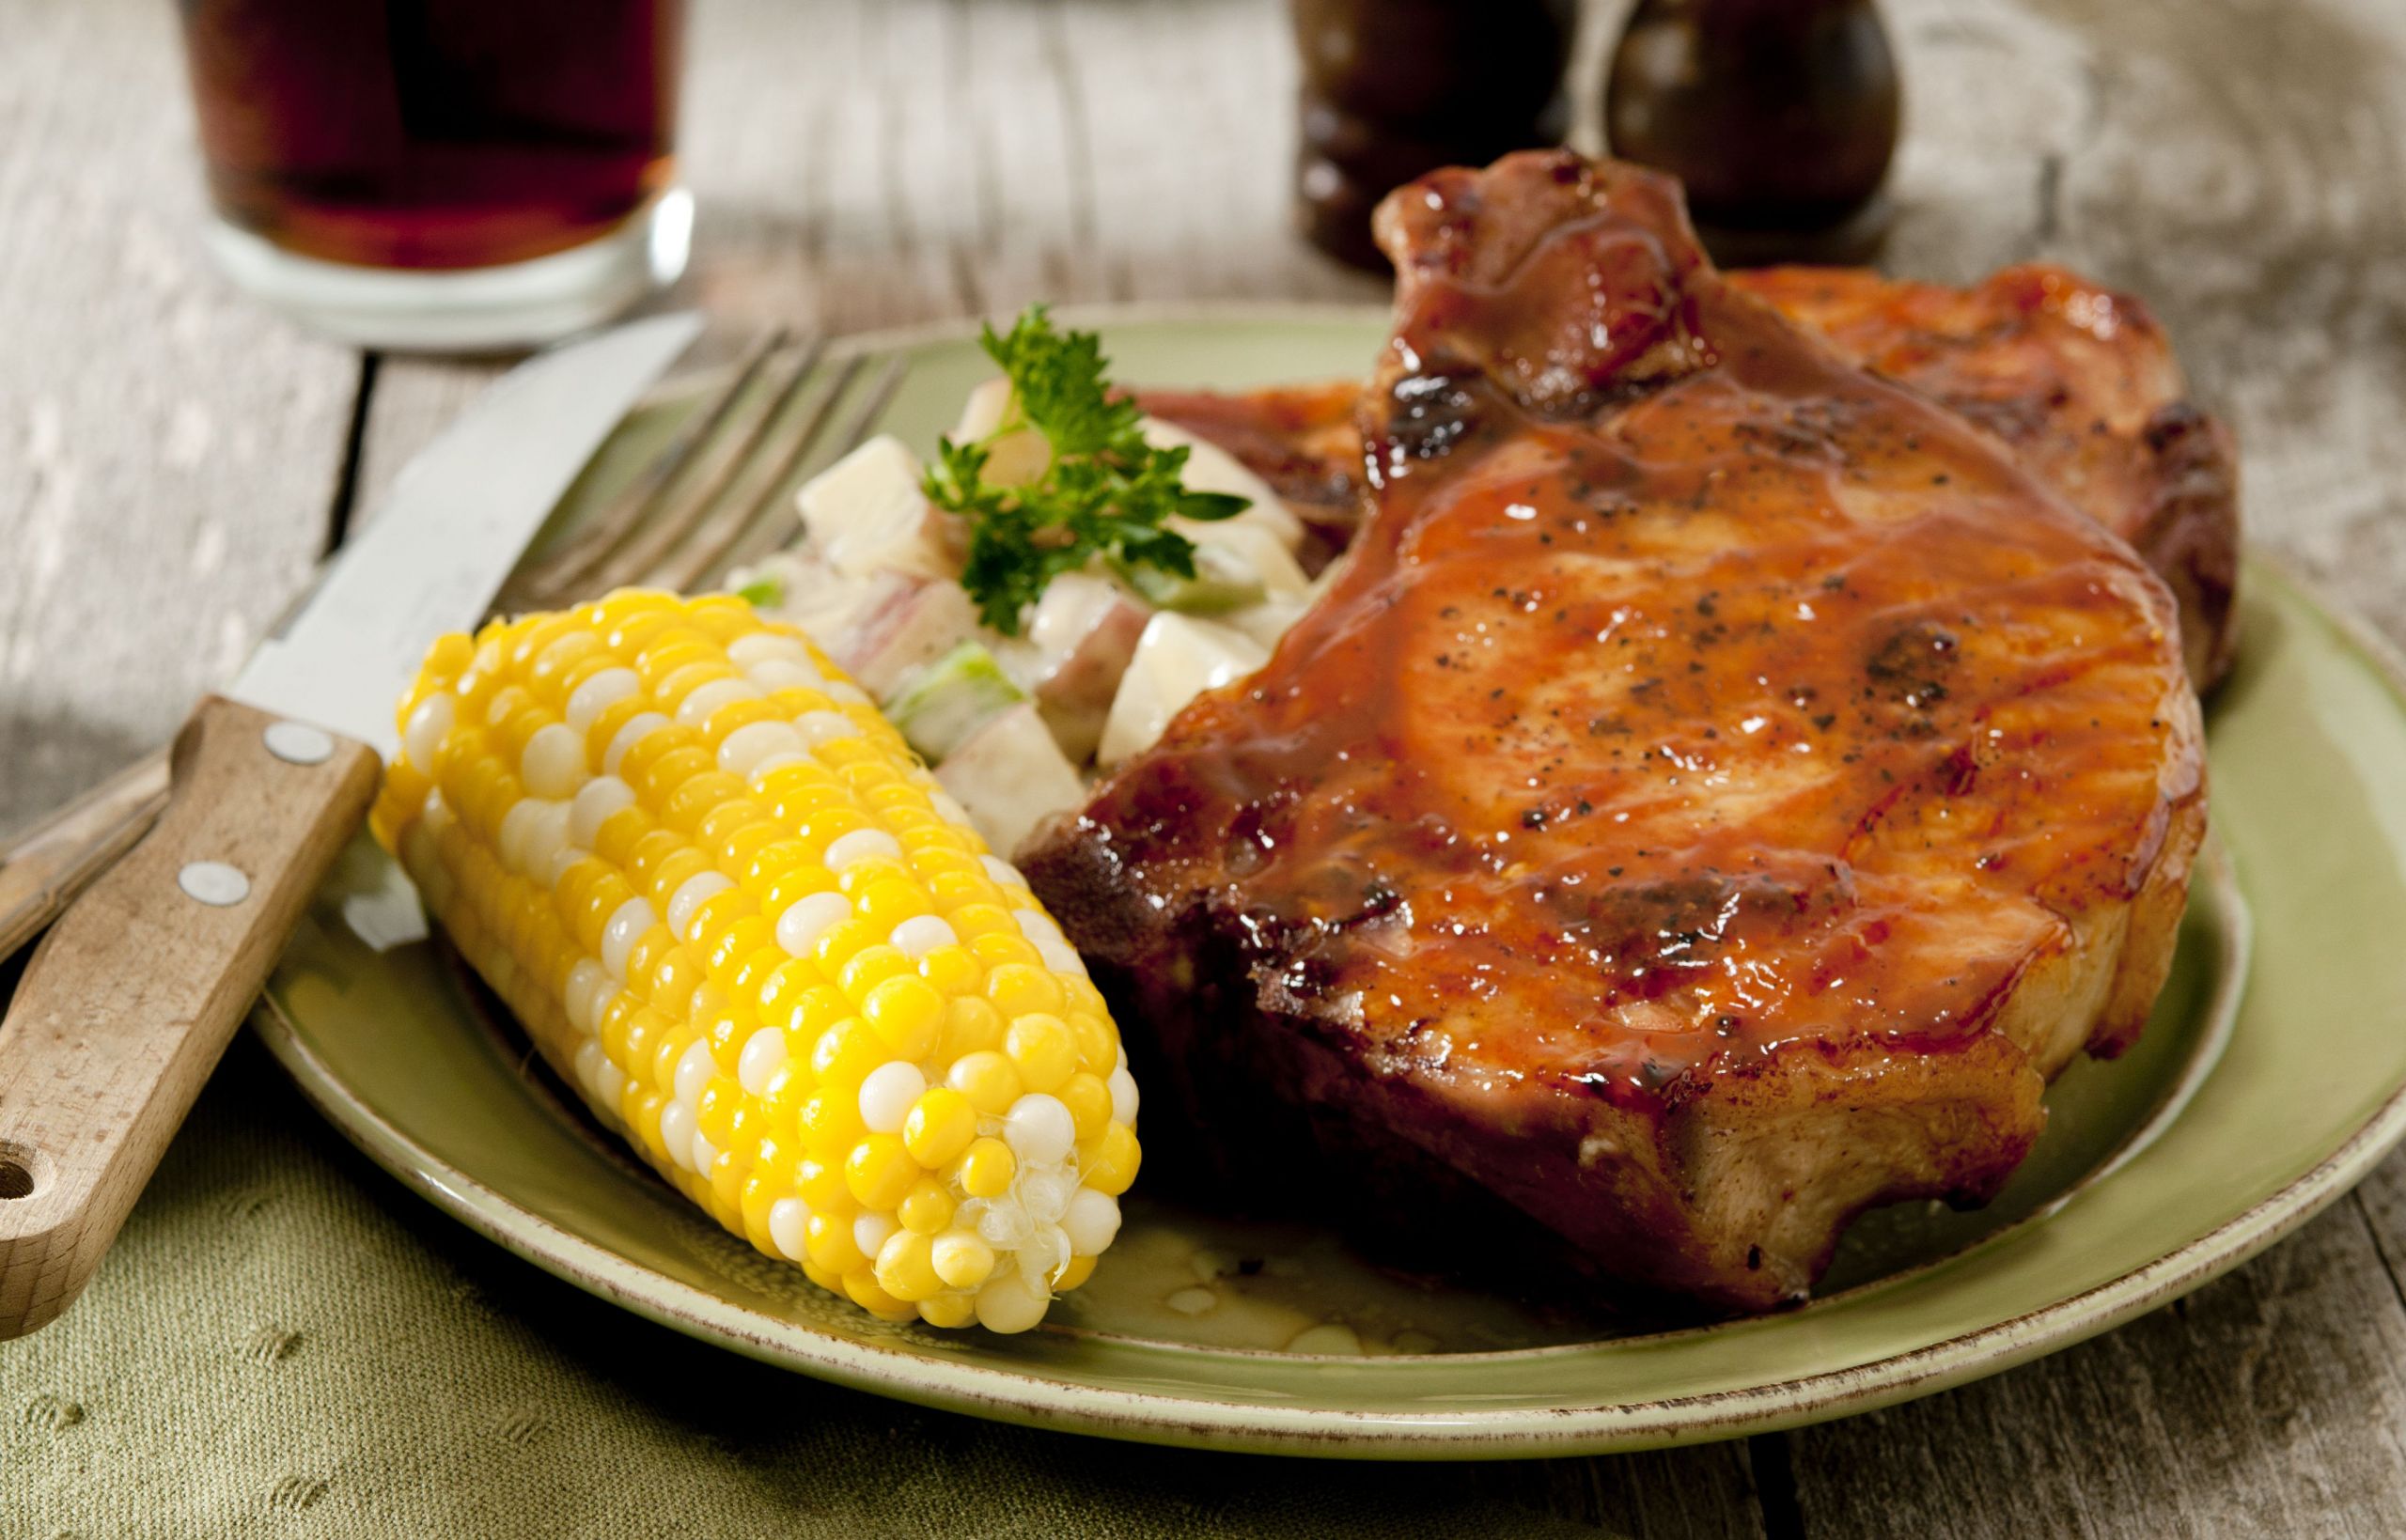 Bbq Sauce Pork Chops
 Baked Pork Chops With Barbecue Sauce Recipe